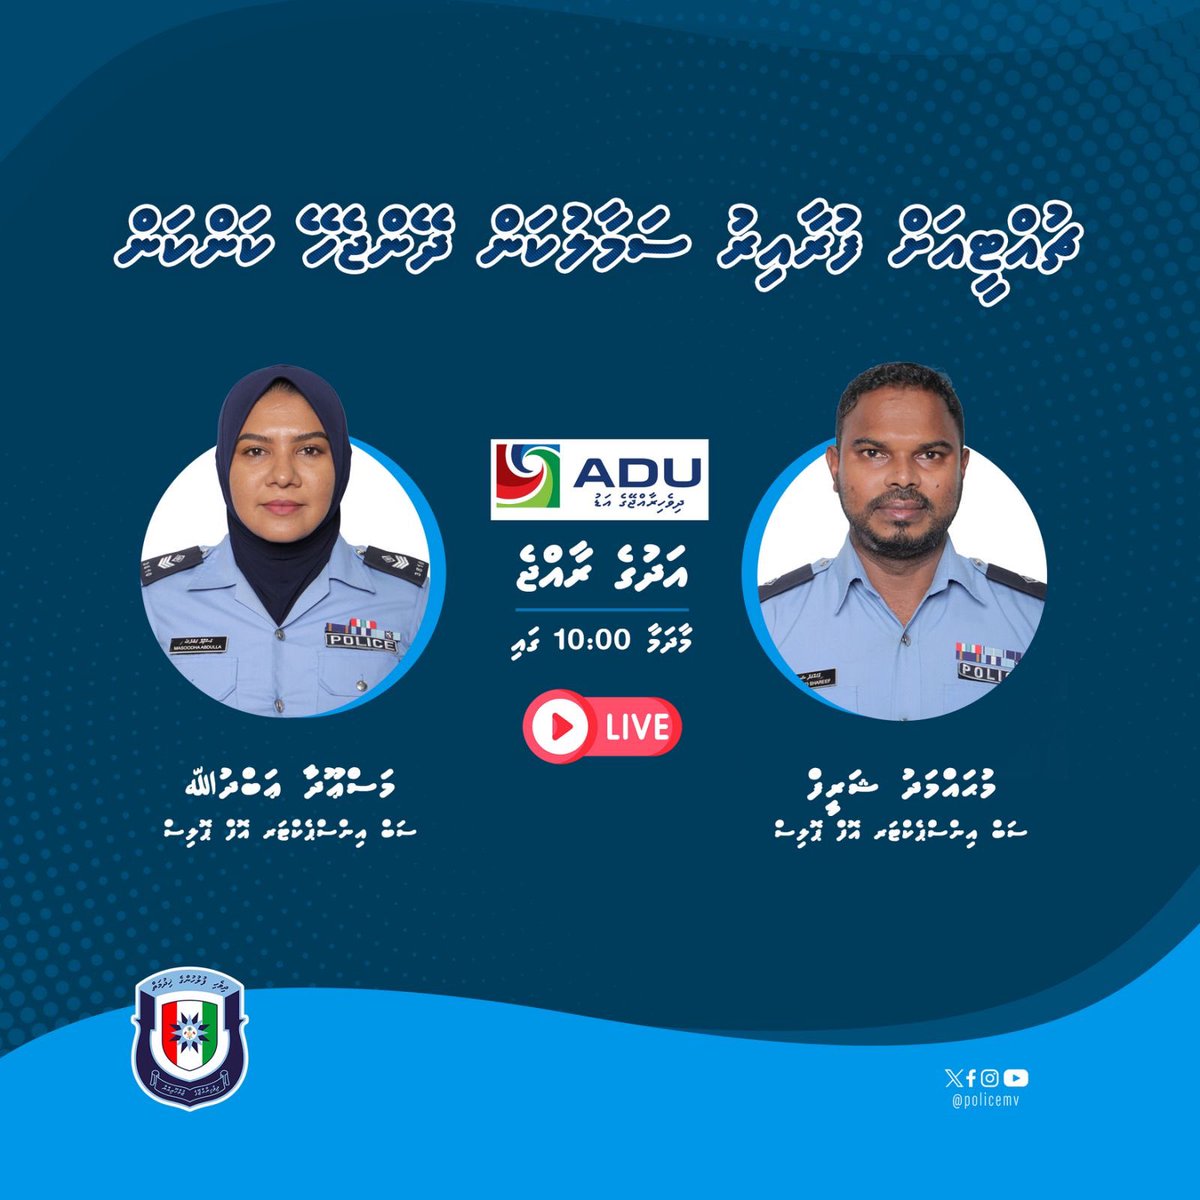 Watch #live on @PSM_ADU '#AdhugeRaajje' program tomorrow at 1000hrs and learn more about safety & securing homes when traveling during Eid holidays with Sub Inspector of Police Mohamed Shareef and Sub Inspector of Police Mas'oodha Abdulla.